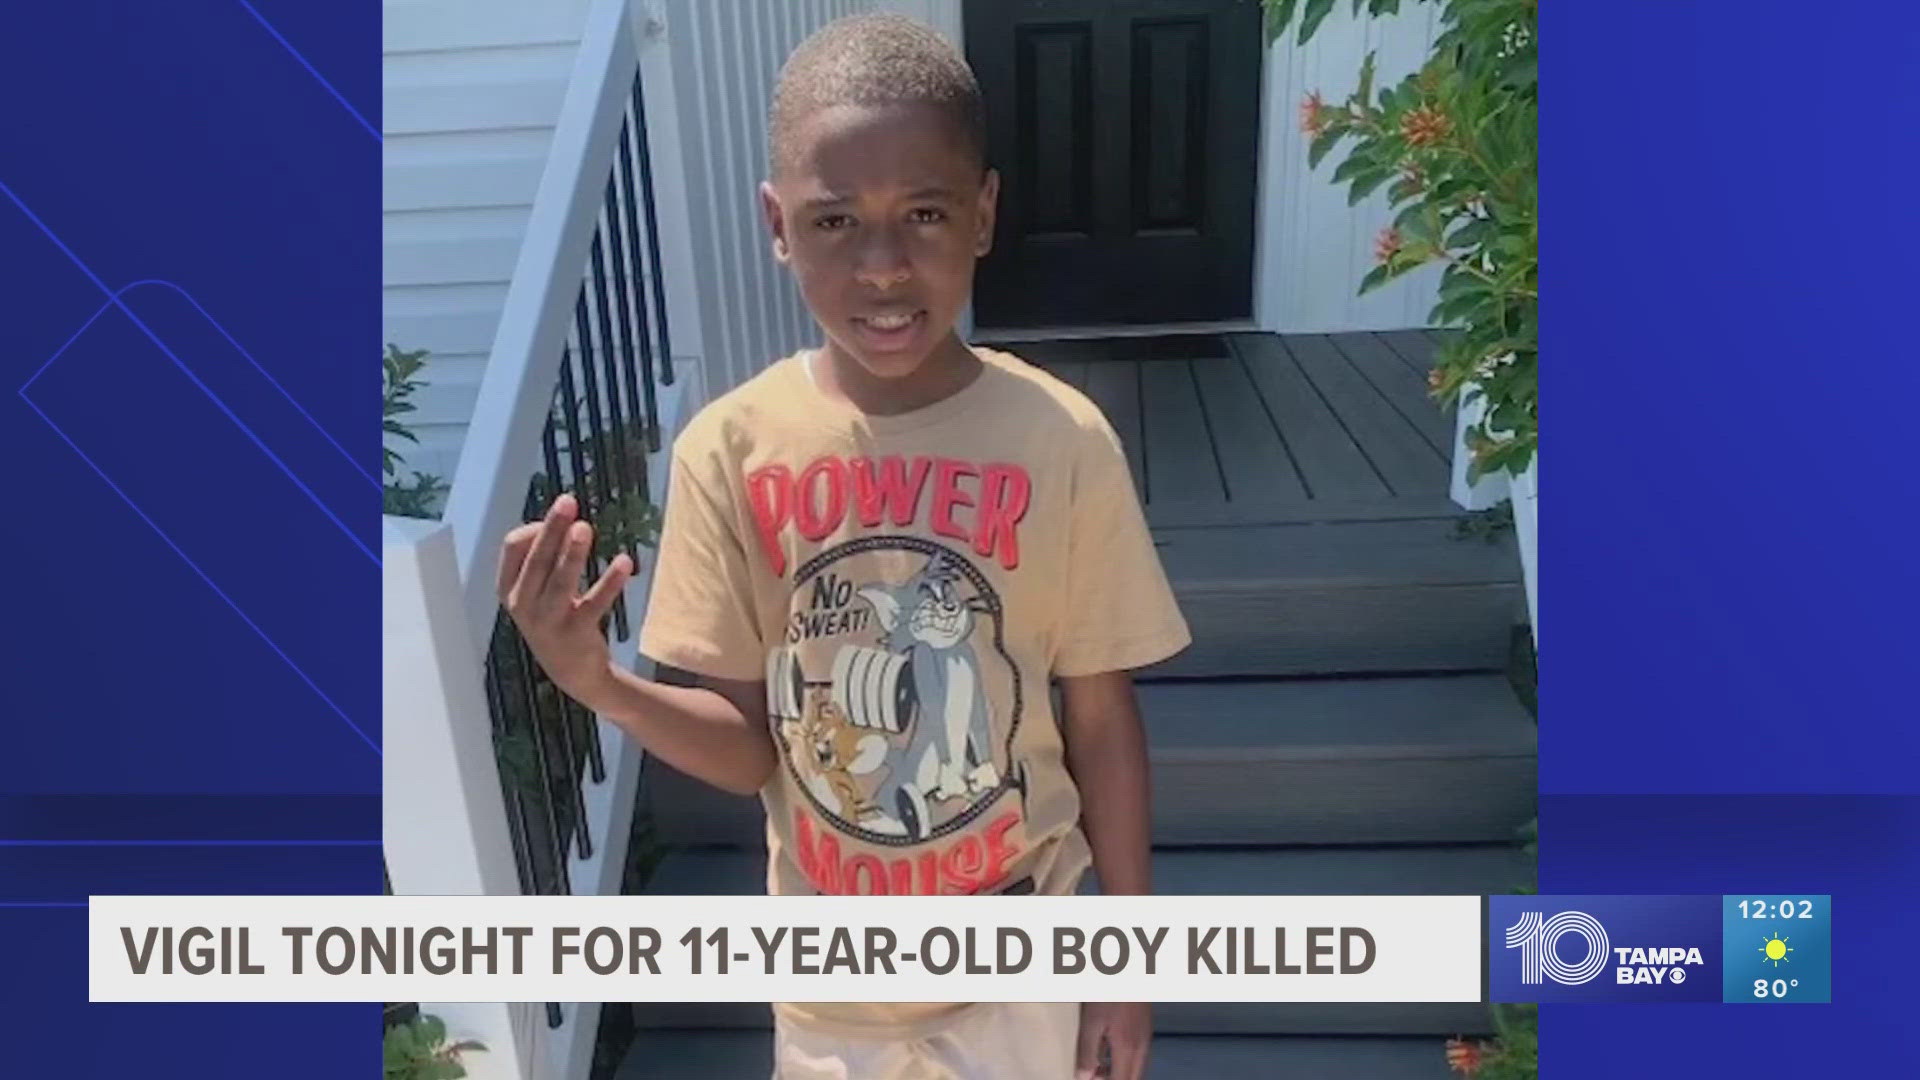 According to police, the 14-year-old brother said he found the gun in an alleyway and accidentally shot his brother when they were playing with it.